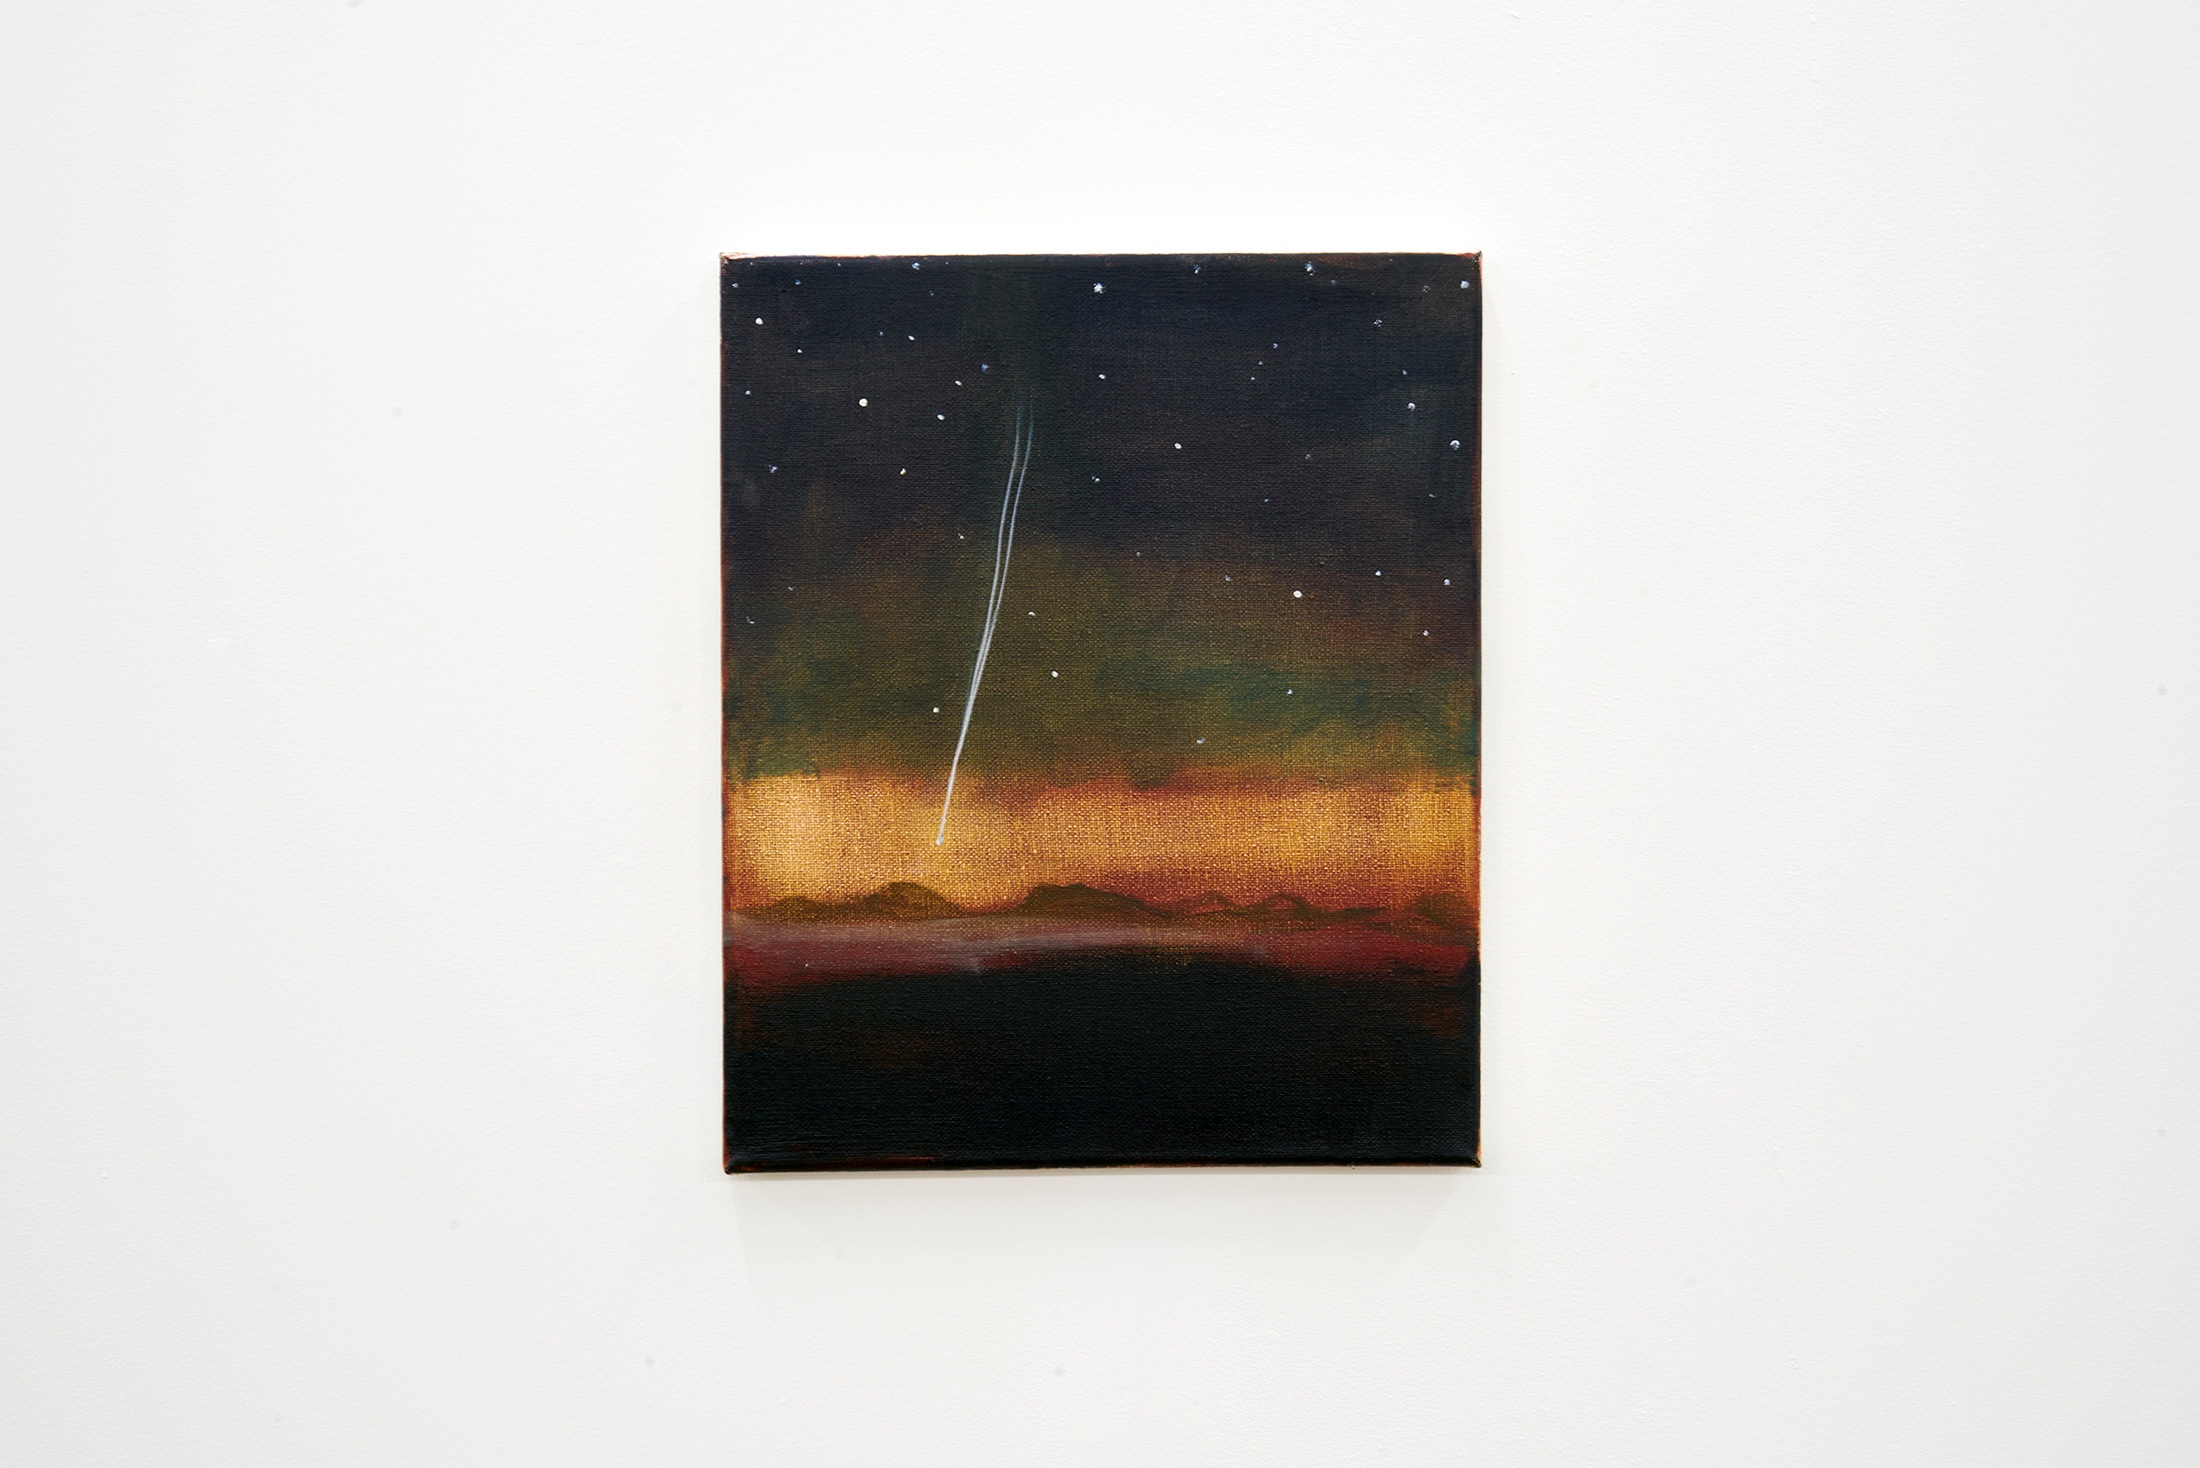 Installation photograph that shows Dexter Dalwood’s oil painting ‘Francisco Fernando’ mounted on a white wall.
